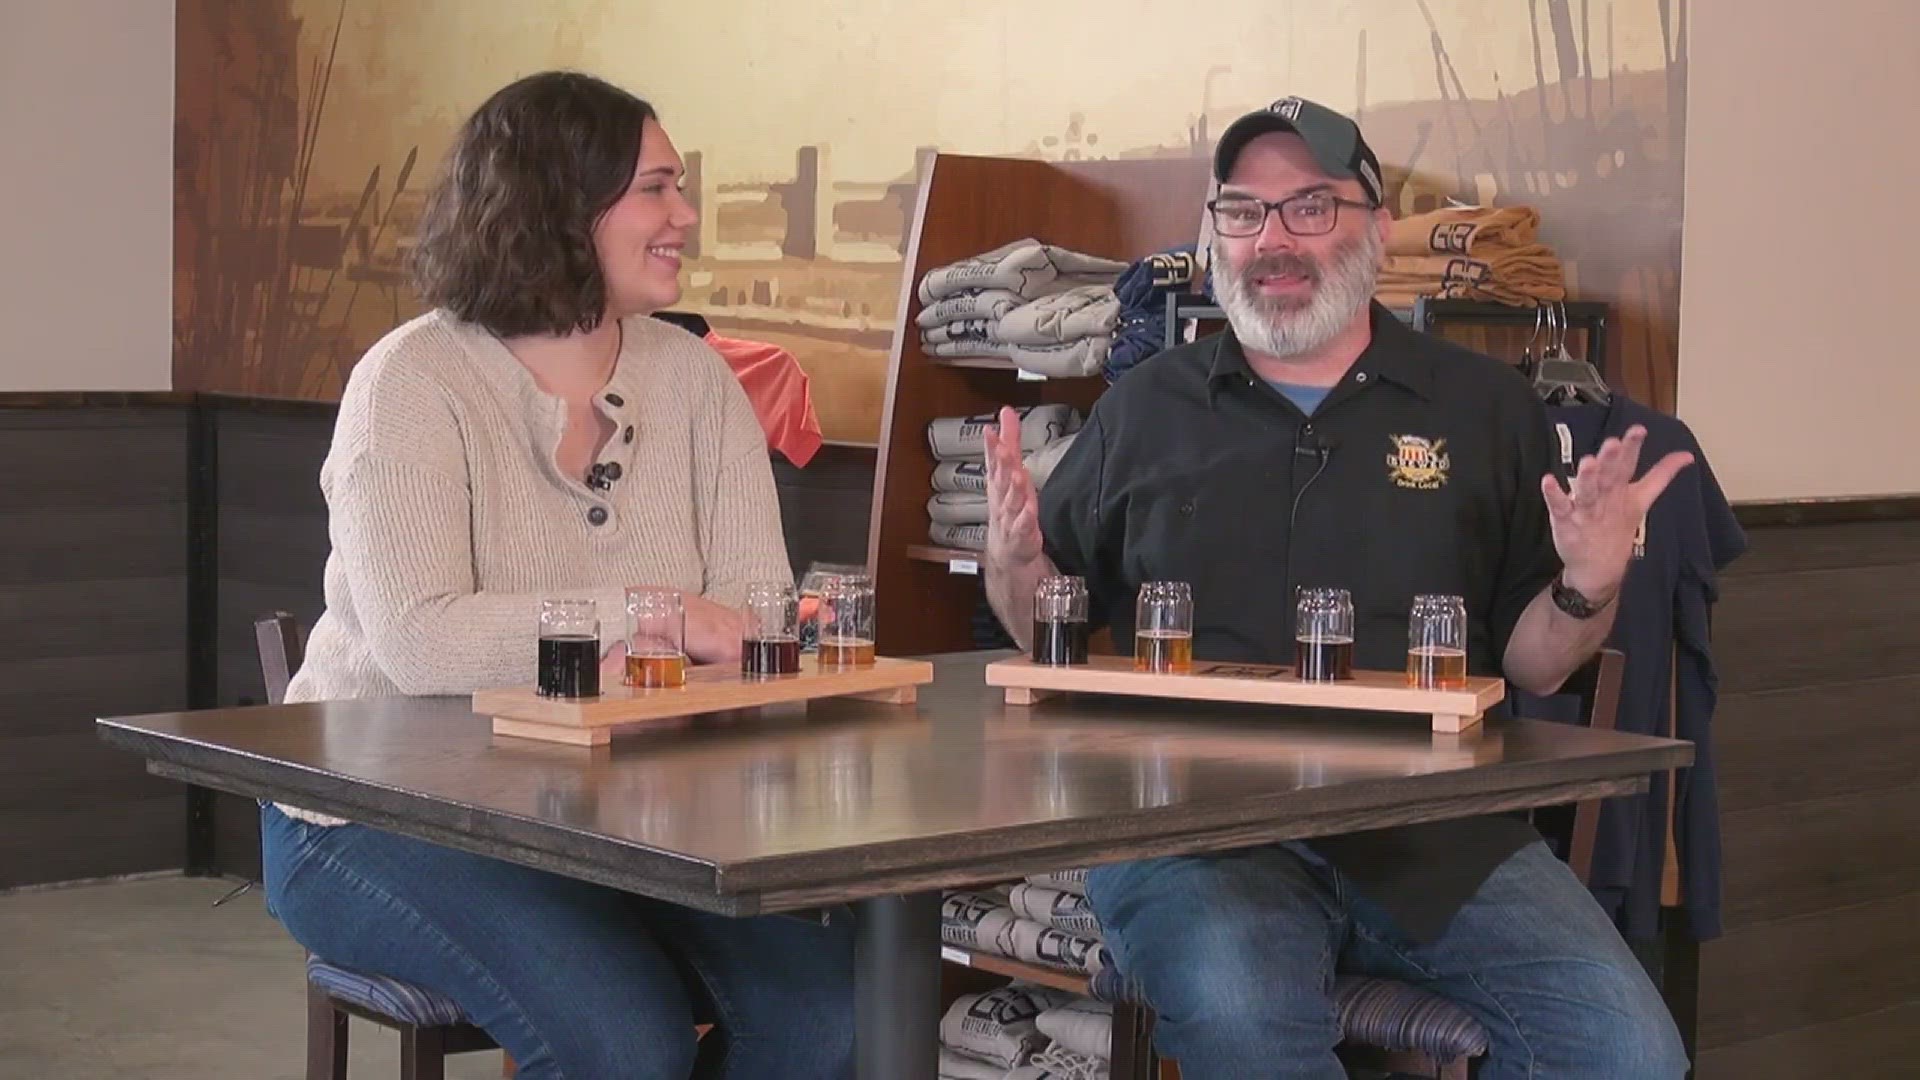 Guttenberg Brewing Co. in northeast Iowa has the youngest owner in the US, maybe even the world, and the Brewed crew sat down with her to find out how she got there.